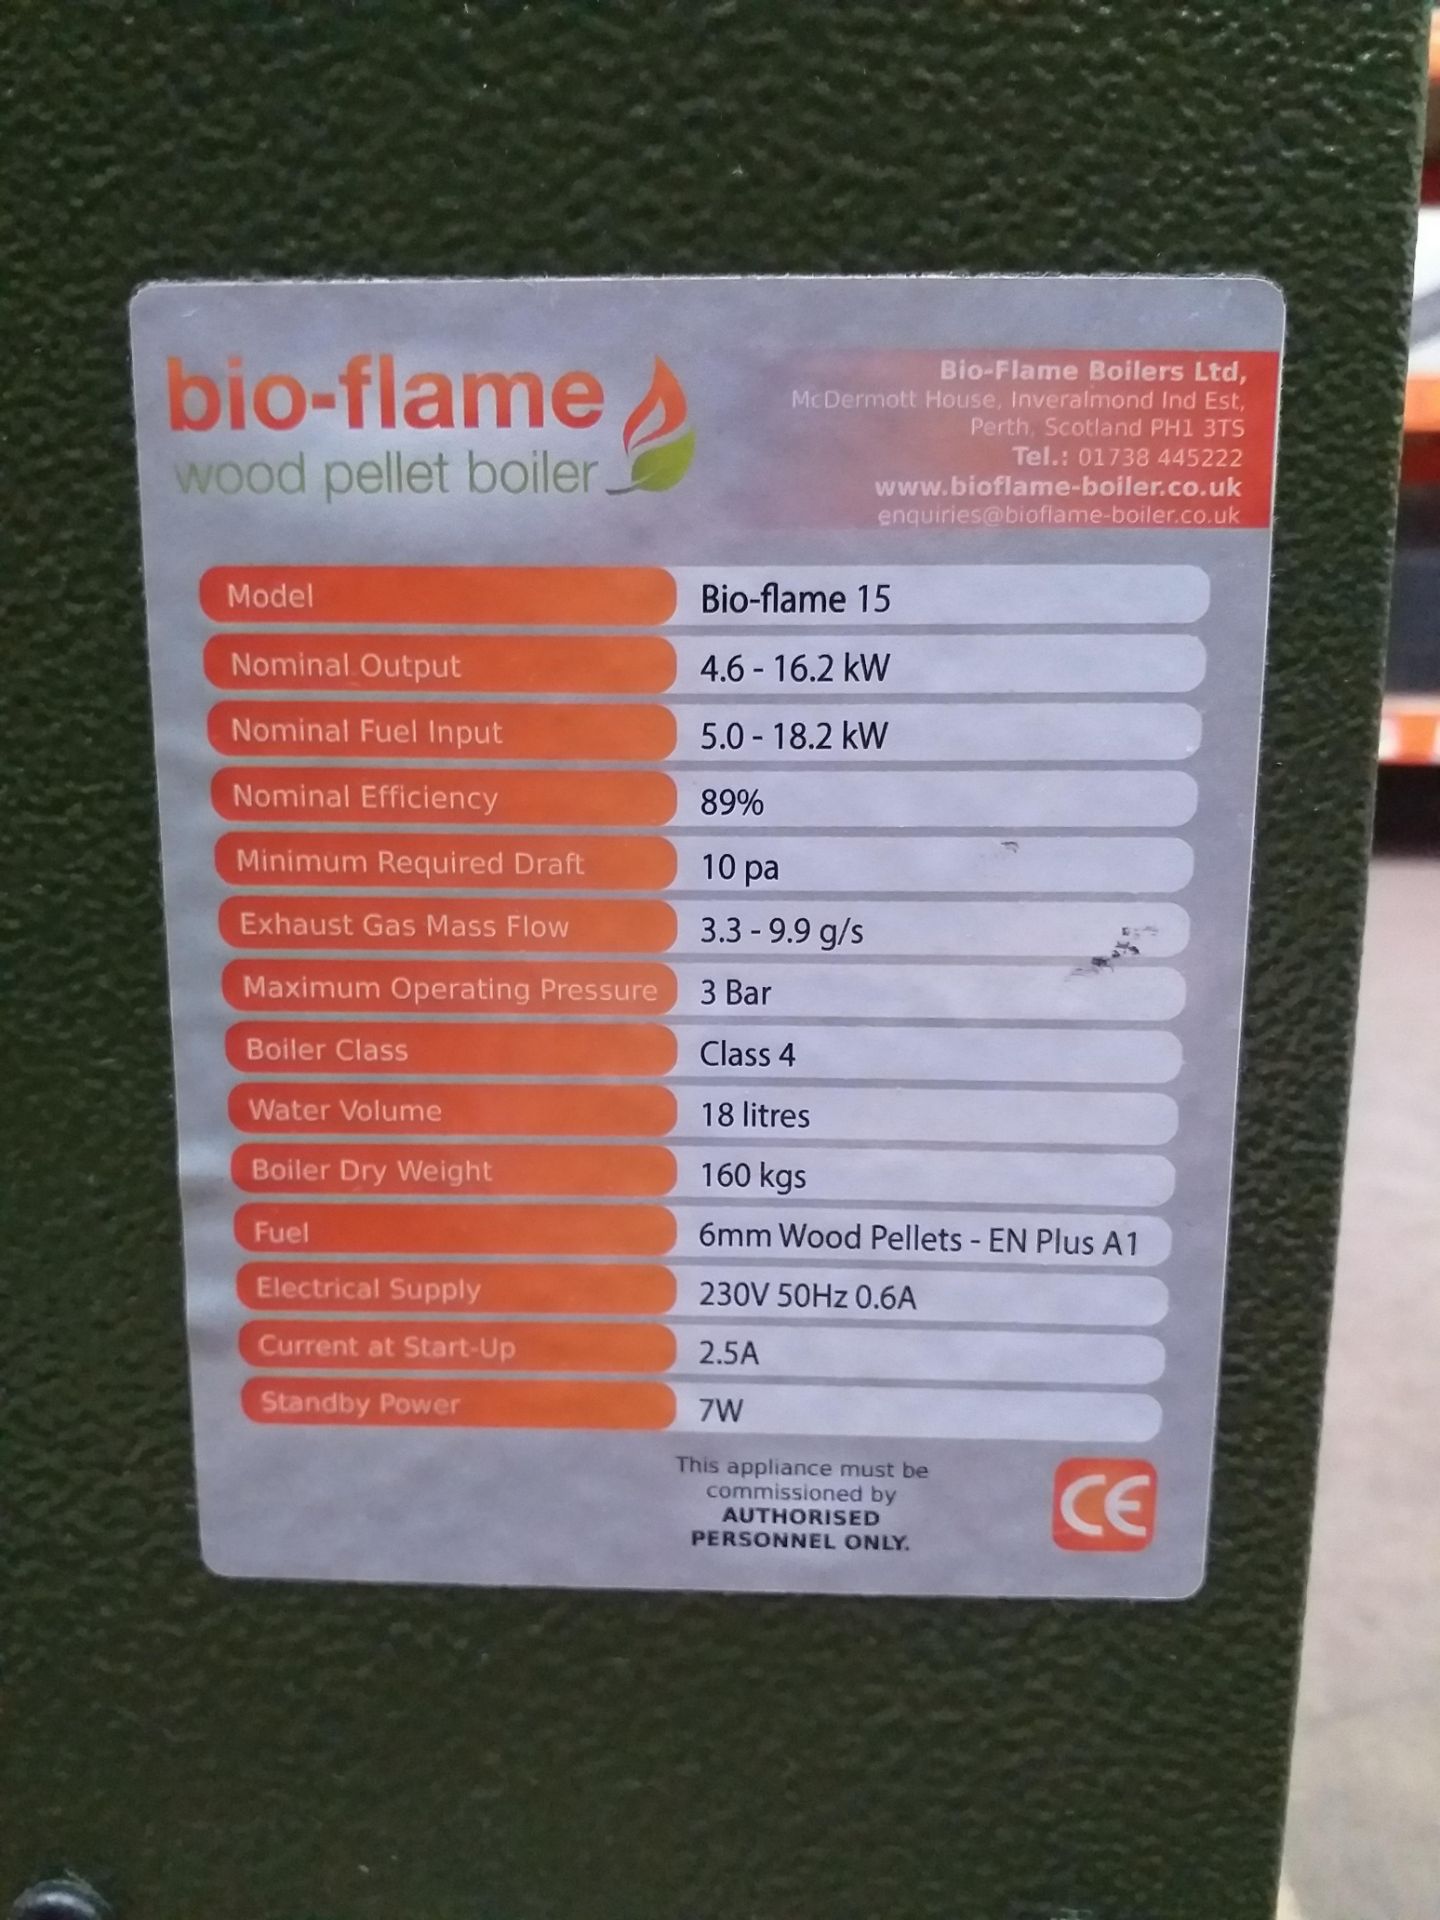 Used Bio-Flame 15 Wood Pellet Boiler supplied by Bio-Flame Boilers Ltd. Nominal Output: 4.6 - 16. - Image 11 of 11